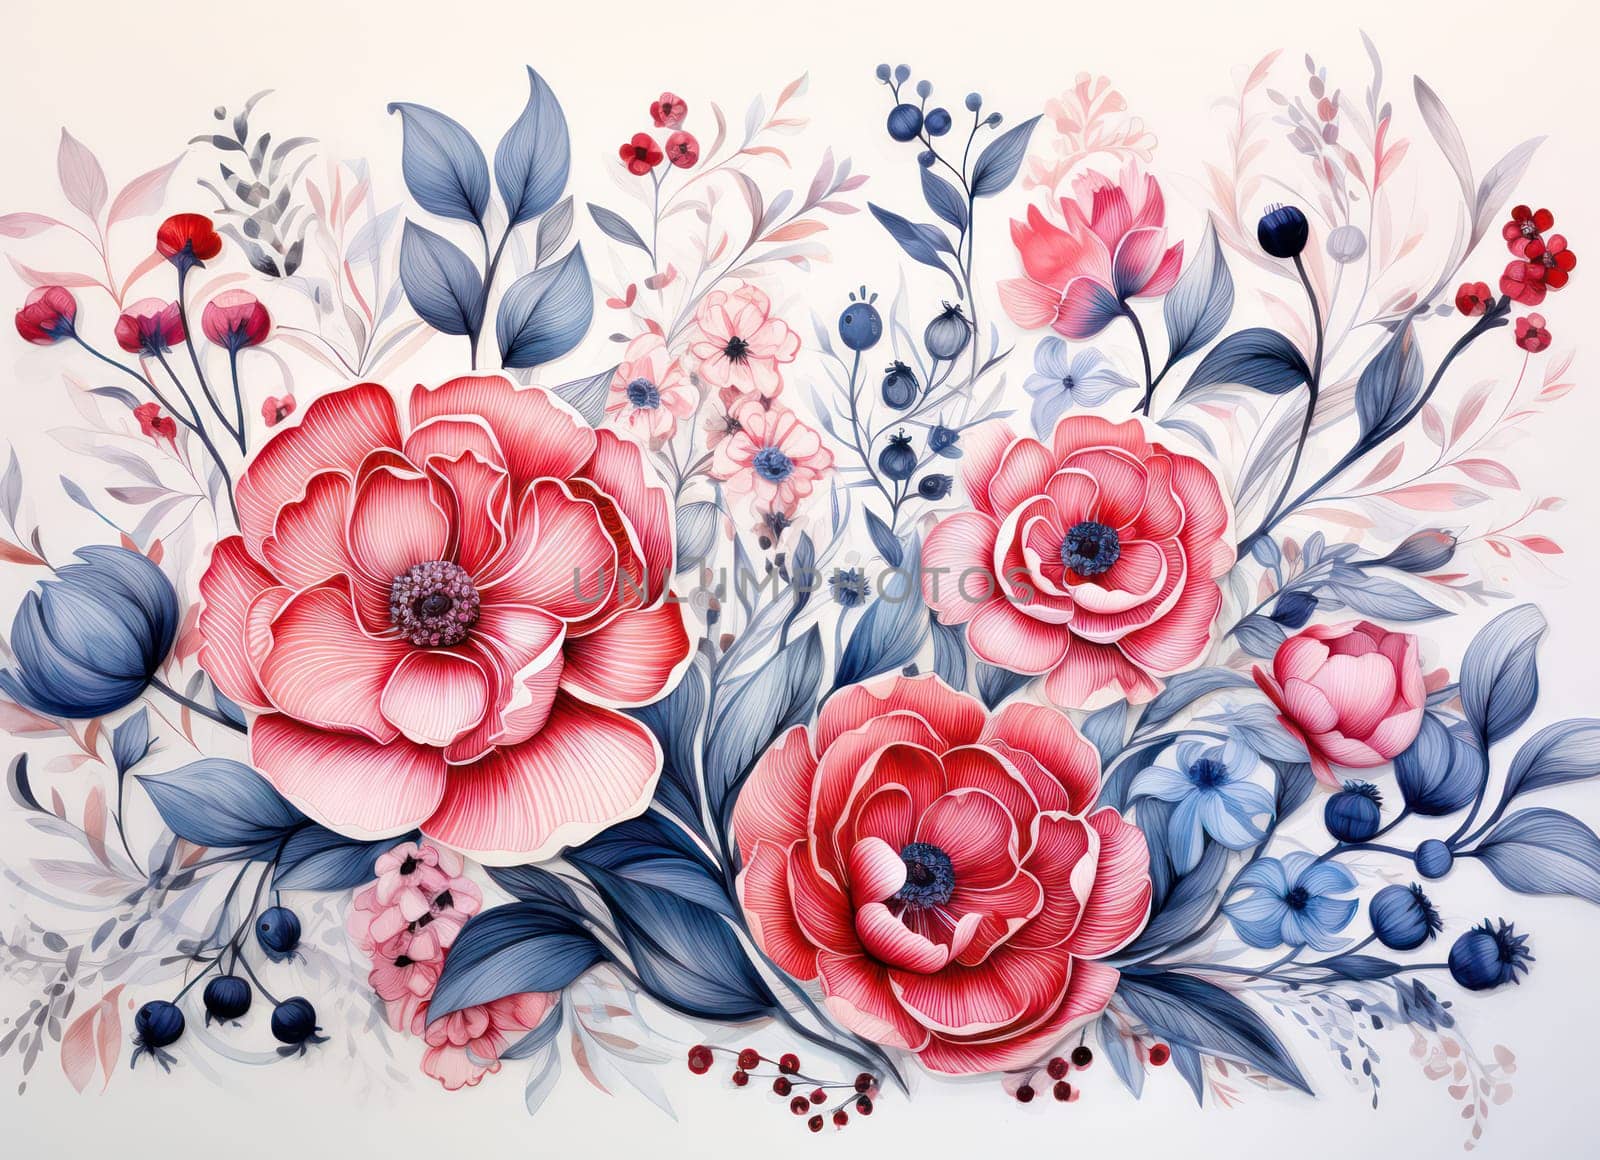 Floral Watercolor Bliss: A Blossoming Garden of Vintage Rose Bouquets on a Romantic Pink and White Seamless Wallpaper by Vichizh